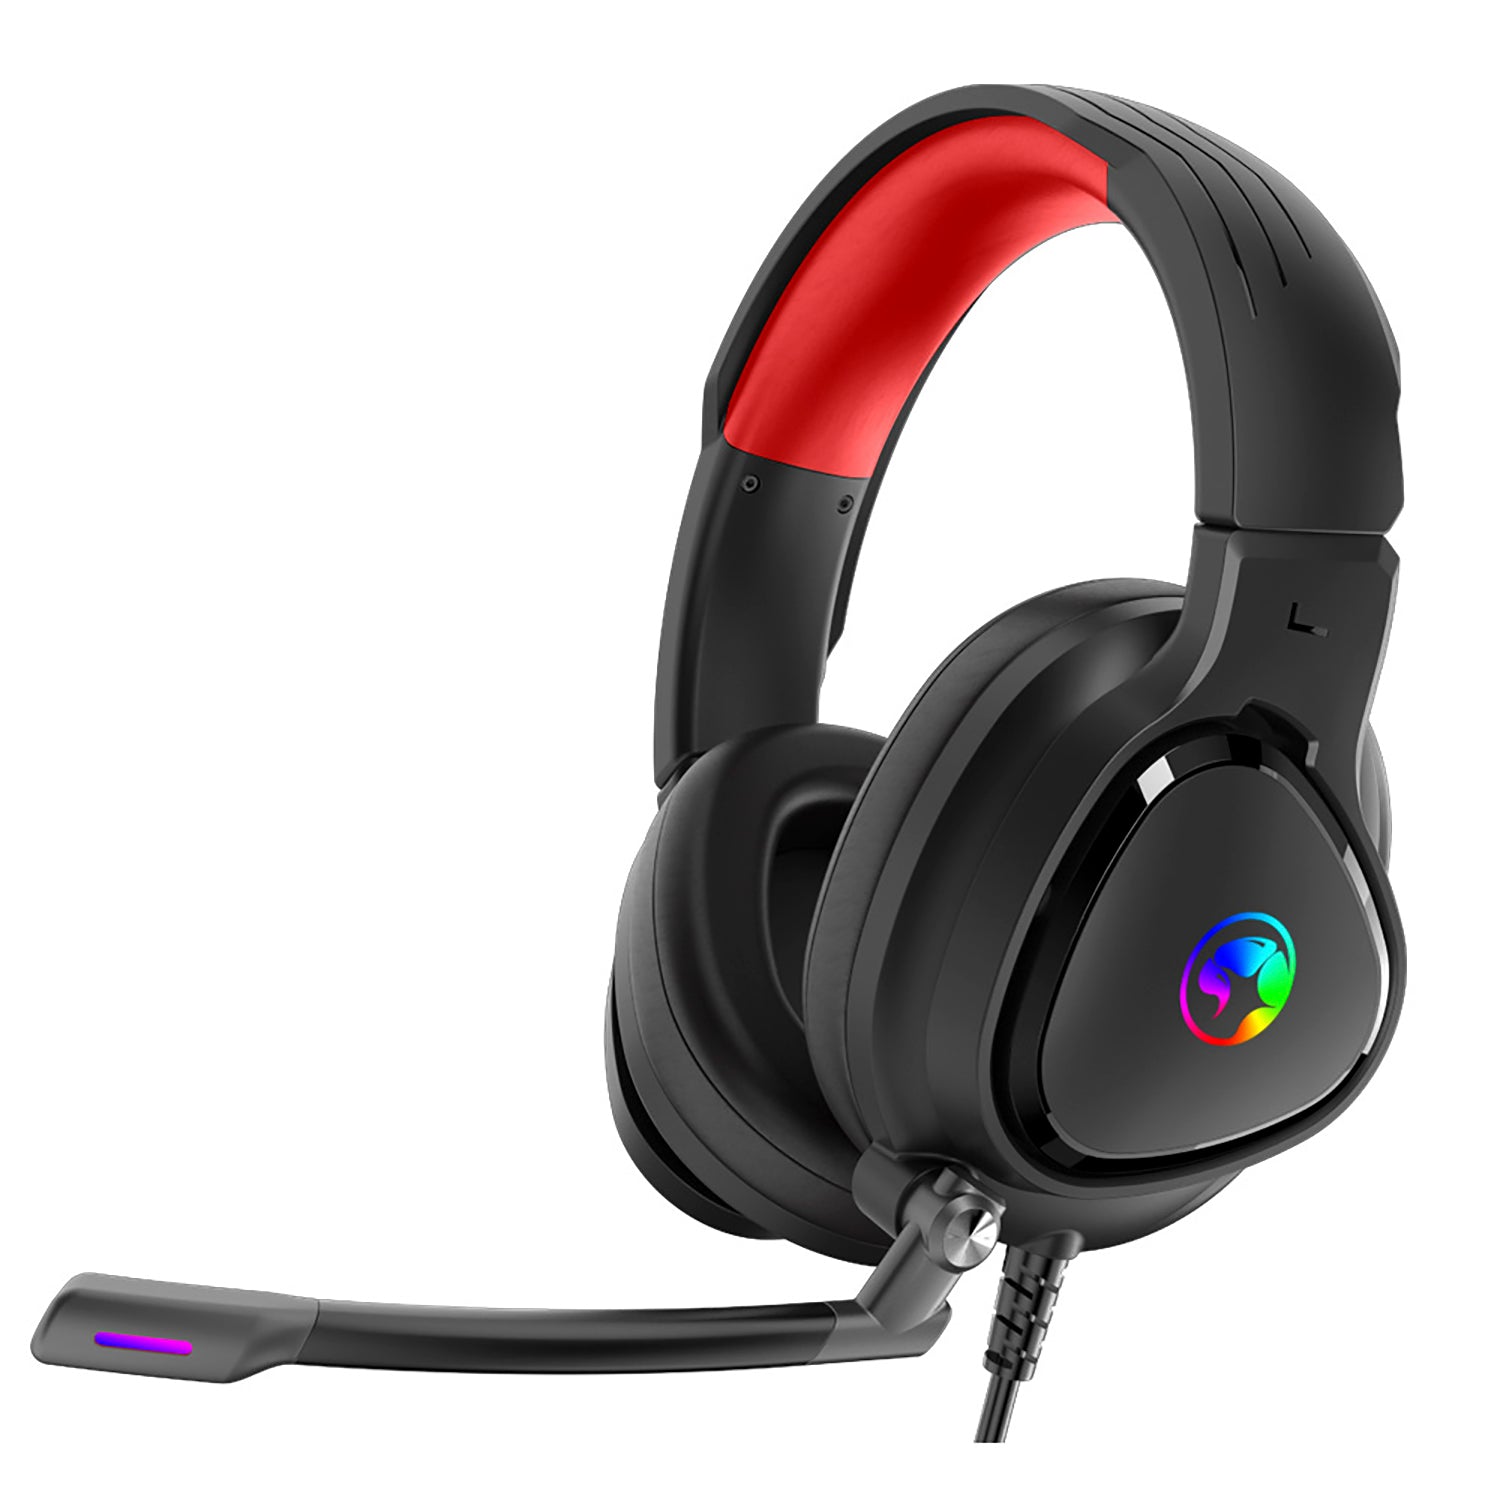 2.0 Headsets Marvo | Stereo with Drivers MarvoTech USB HG8958 40mm Gaming